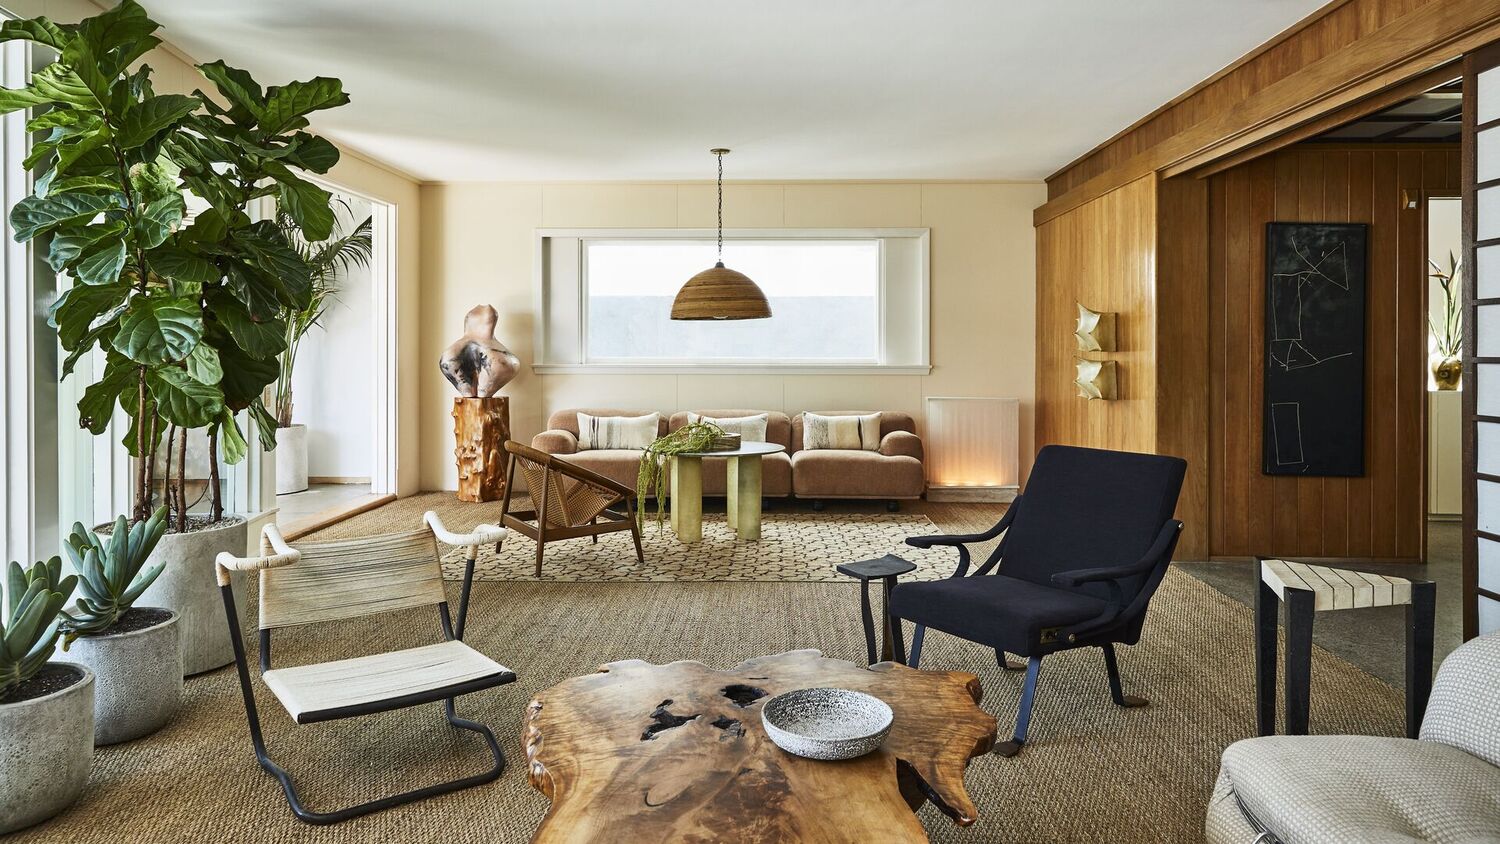 The 12 American Interior Designers You Need To Know